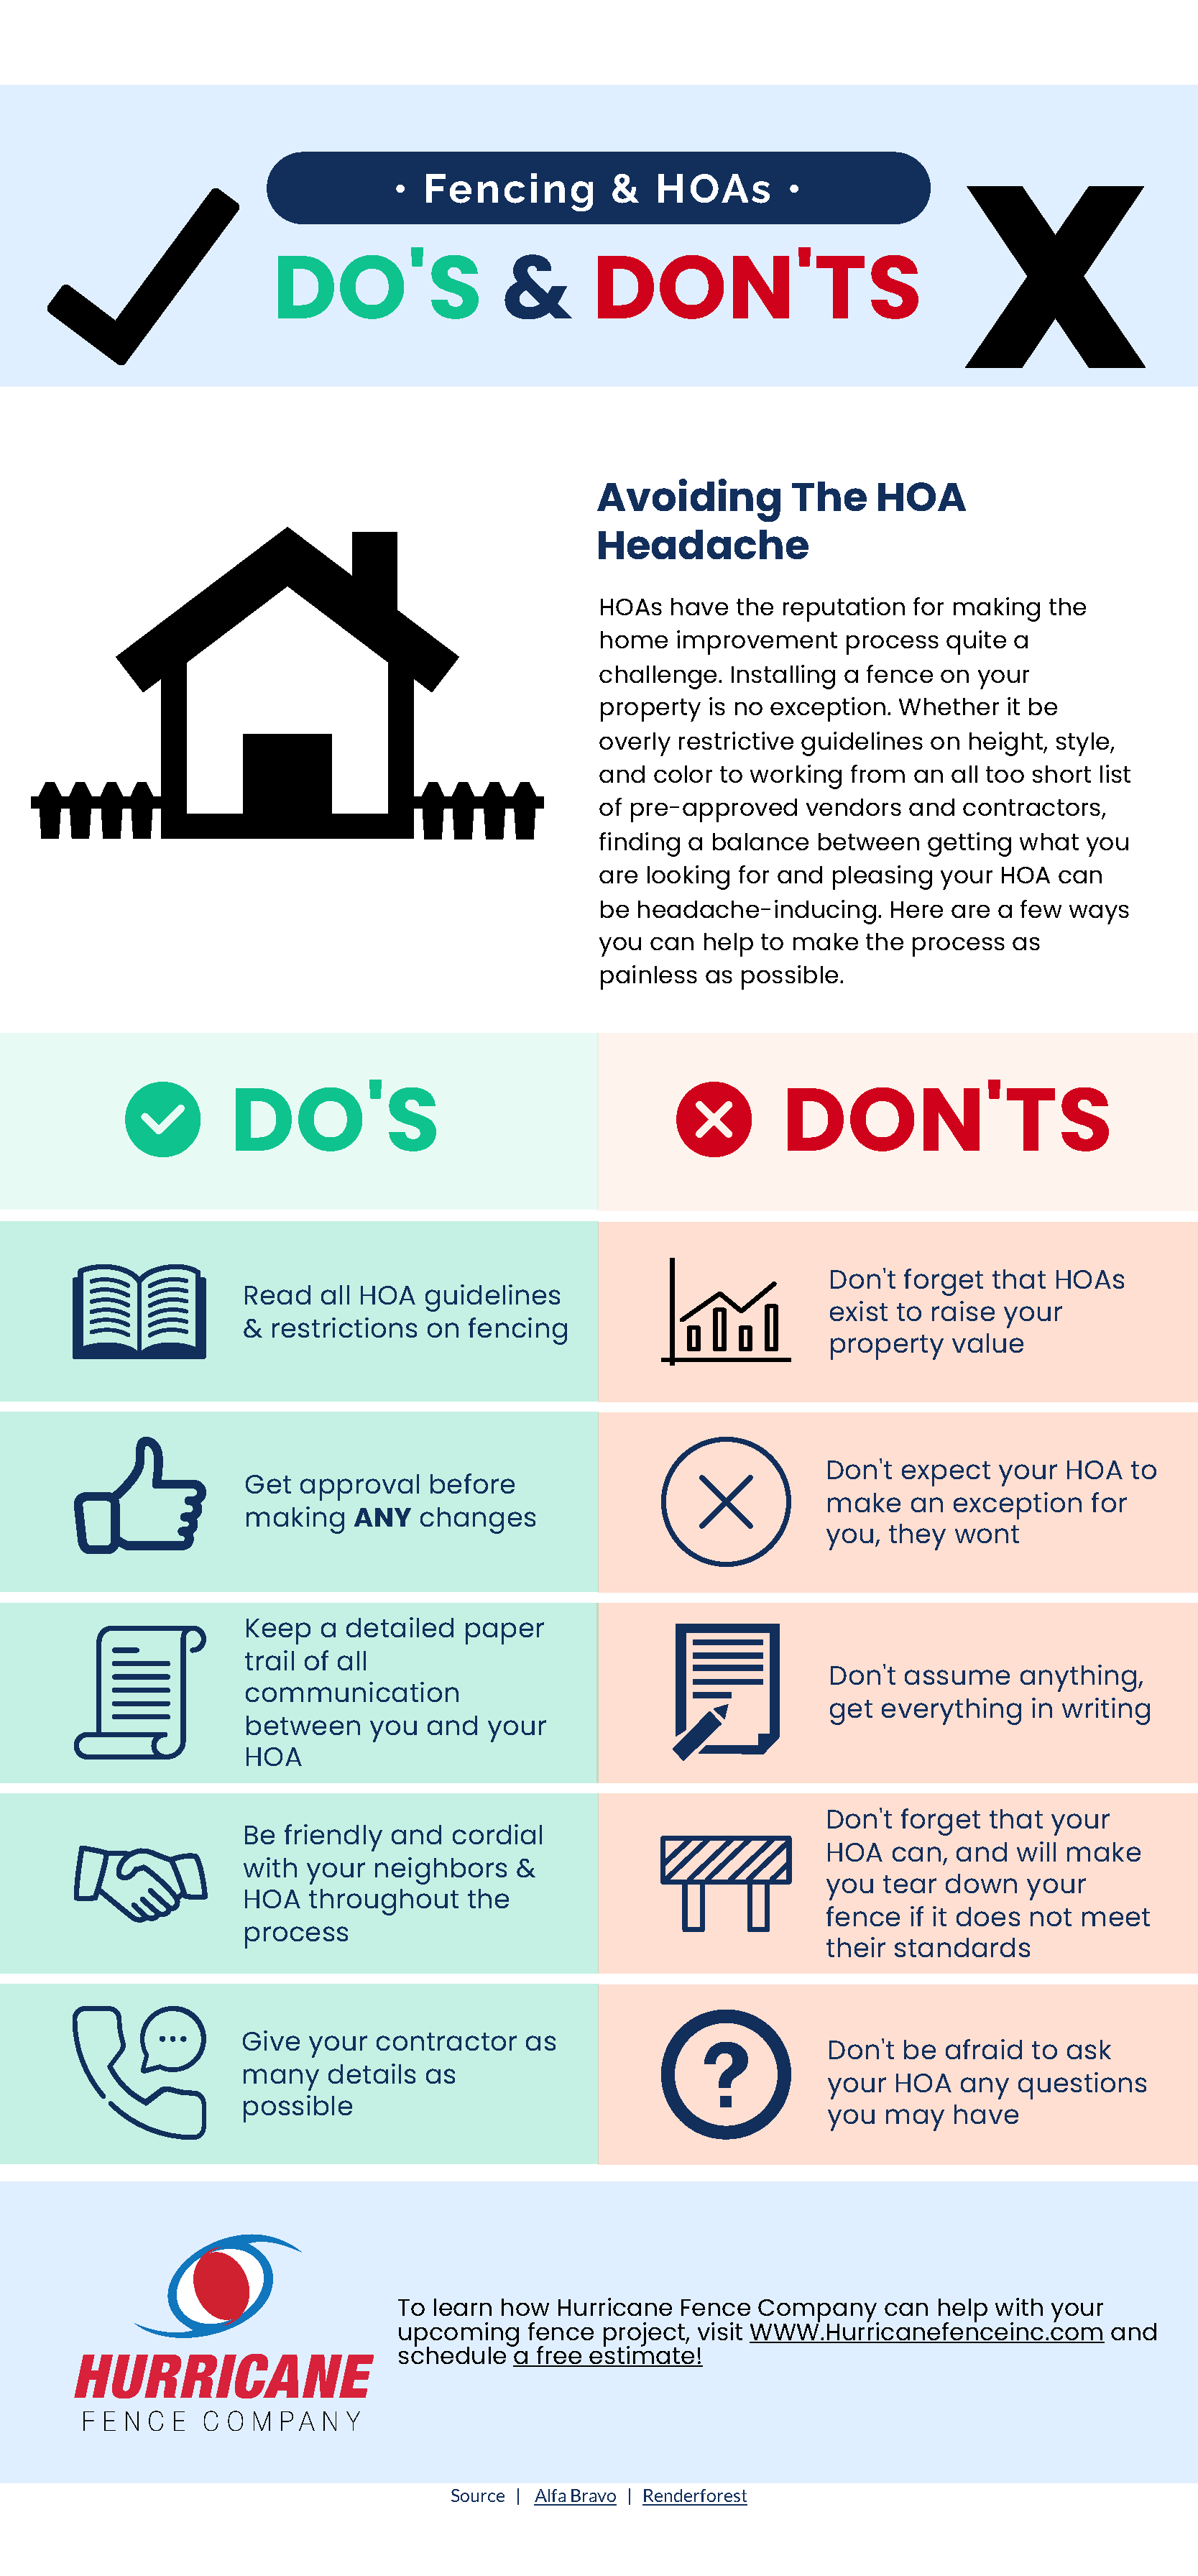 Infographic by Hurricane Fence Company that describes the do's & don'ts of fencing in your residential backyard with an HOA containing a short introduction, a comparative list of do's and don'ts, and links to set up a free estimate with Hurricane Fence.